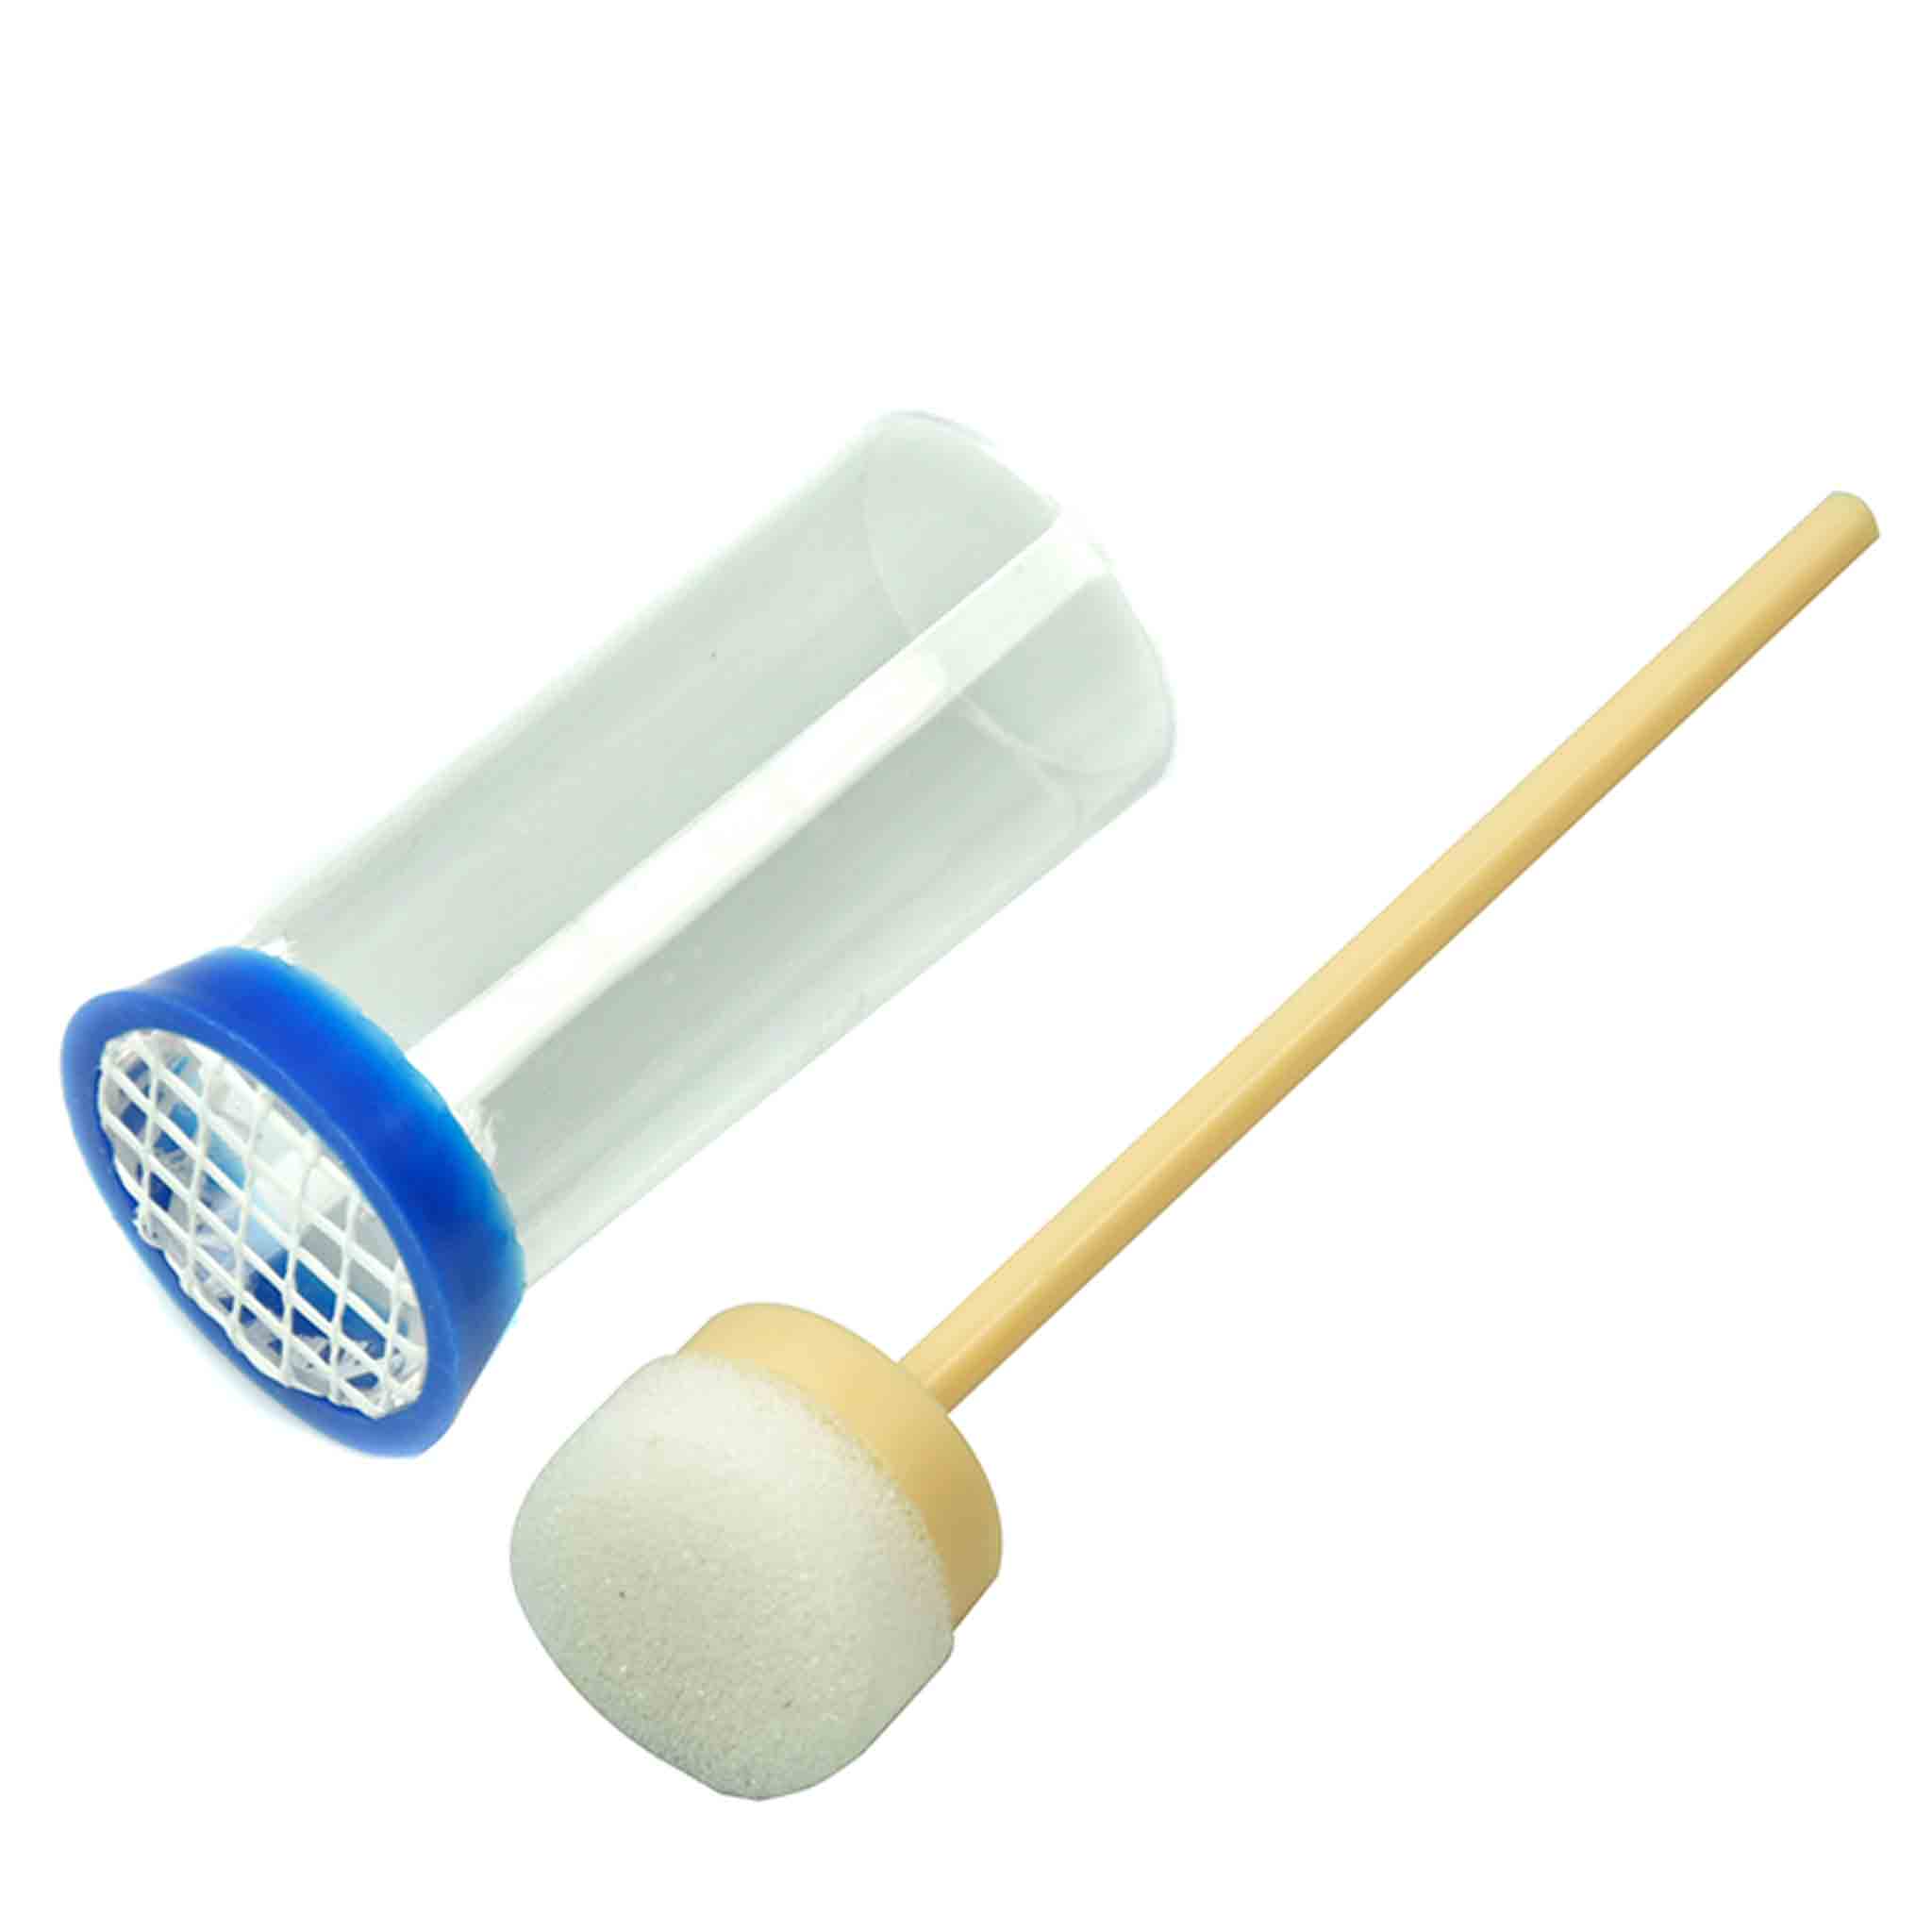 Queen Marking Cage and Catcher with Plunger - Queen collection by Buzzbee Beekeeping Supplies